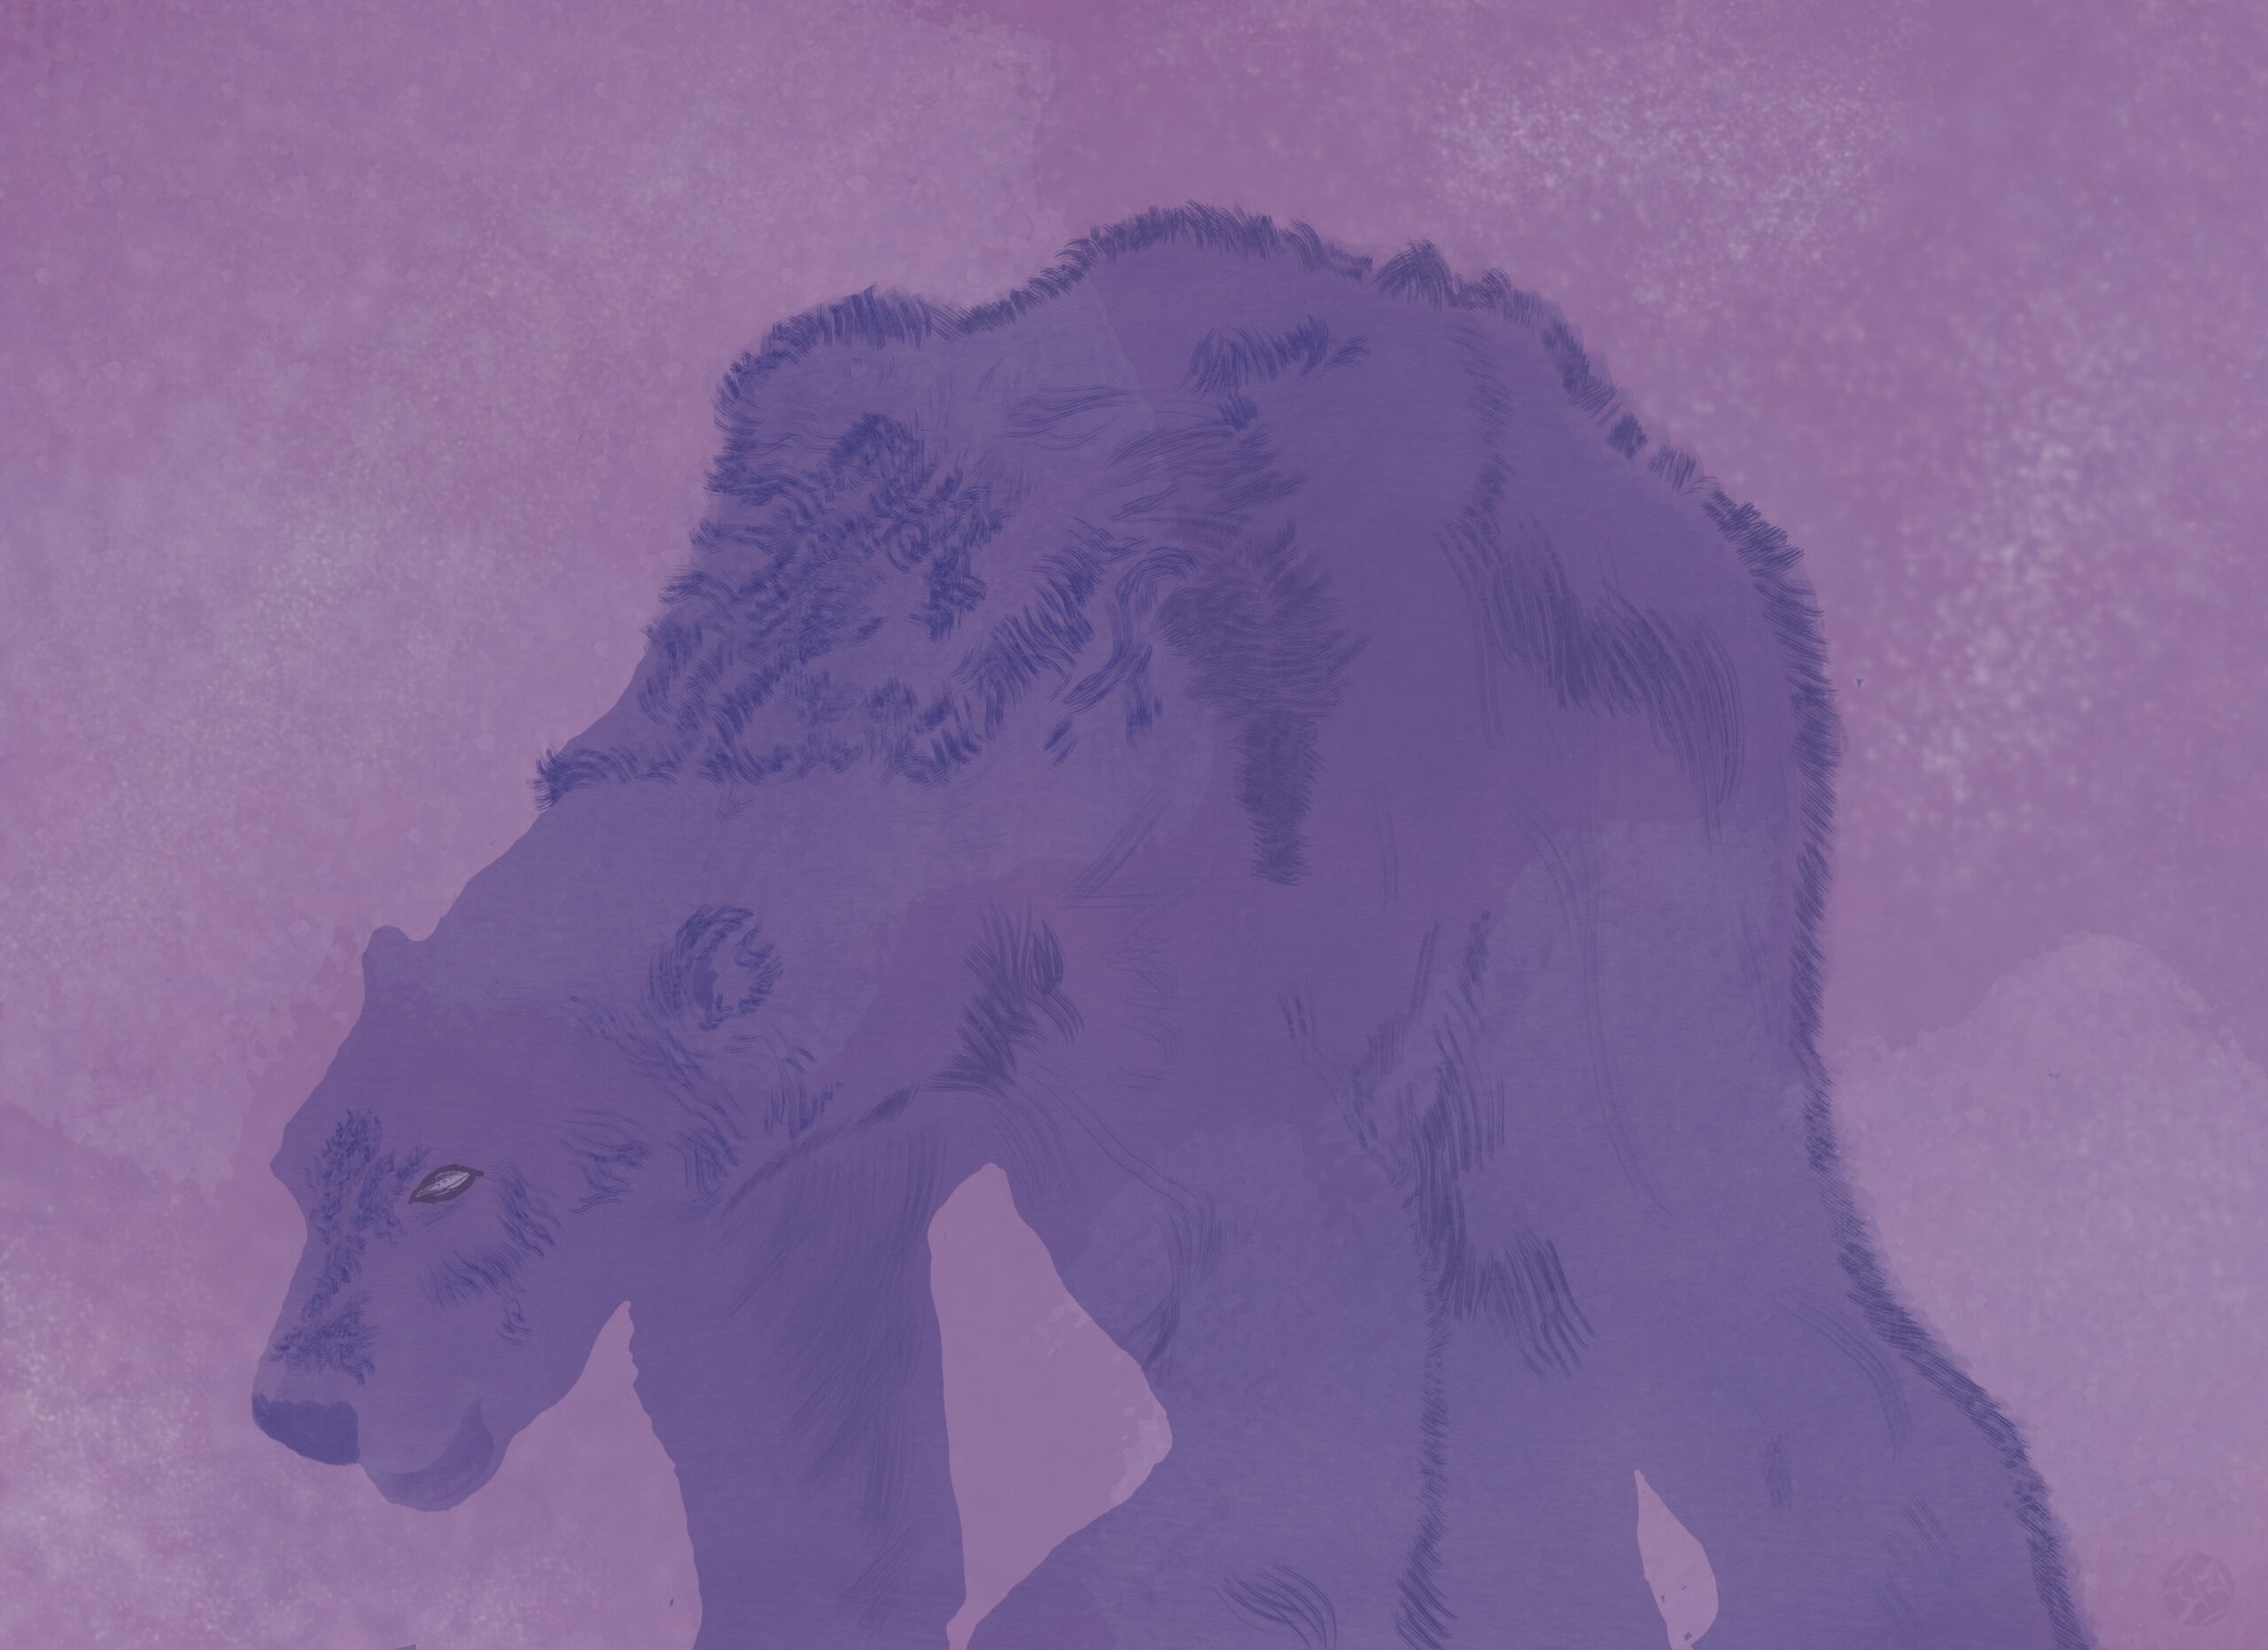 stylized image of polar bear, thin and starving, translucent blue over pink